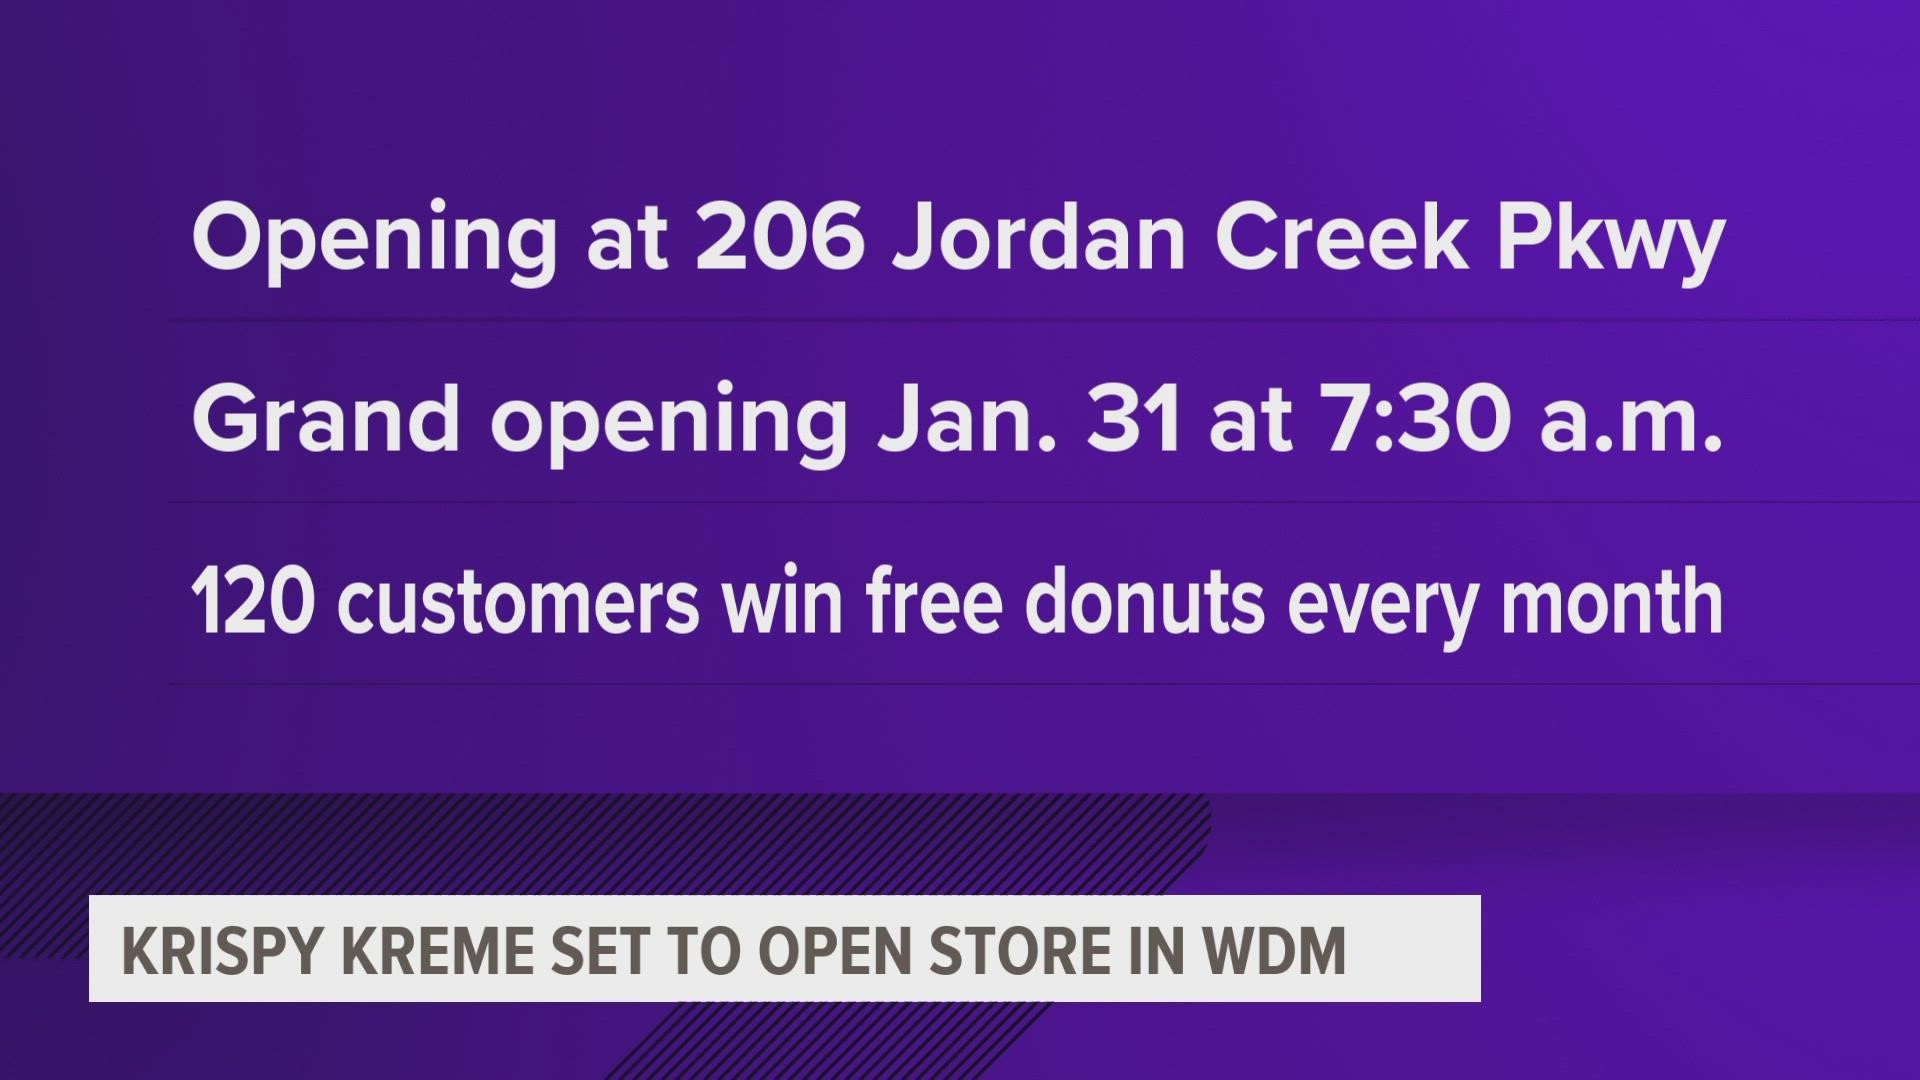 The donut shop will open at 7:30 a.m. at the Jordan Creek Parkway location on the last day of the month.